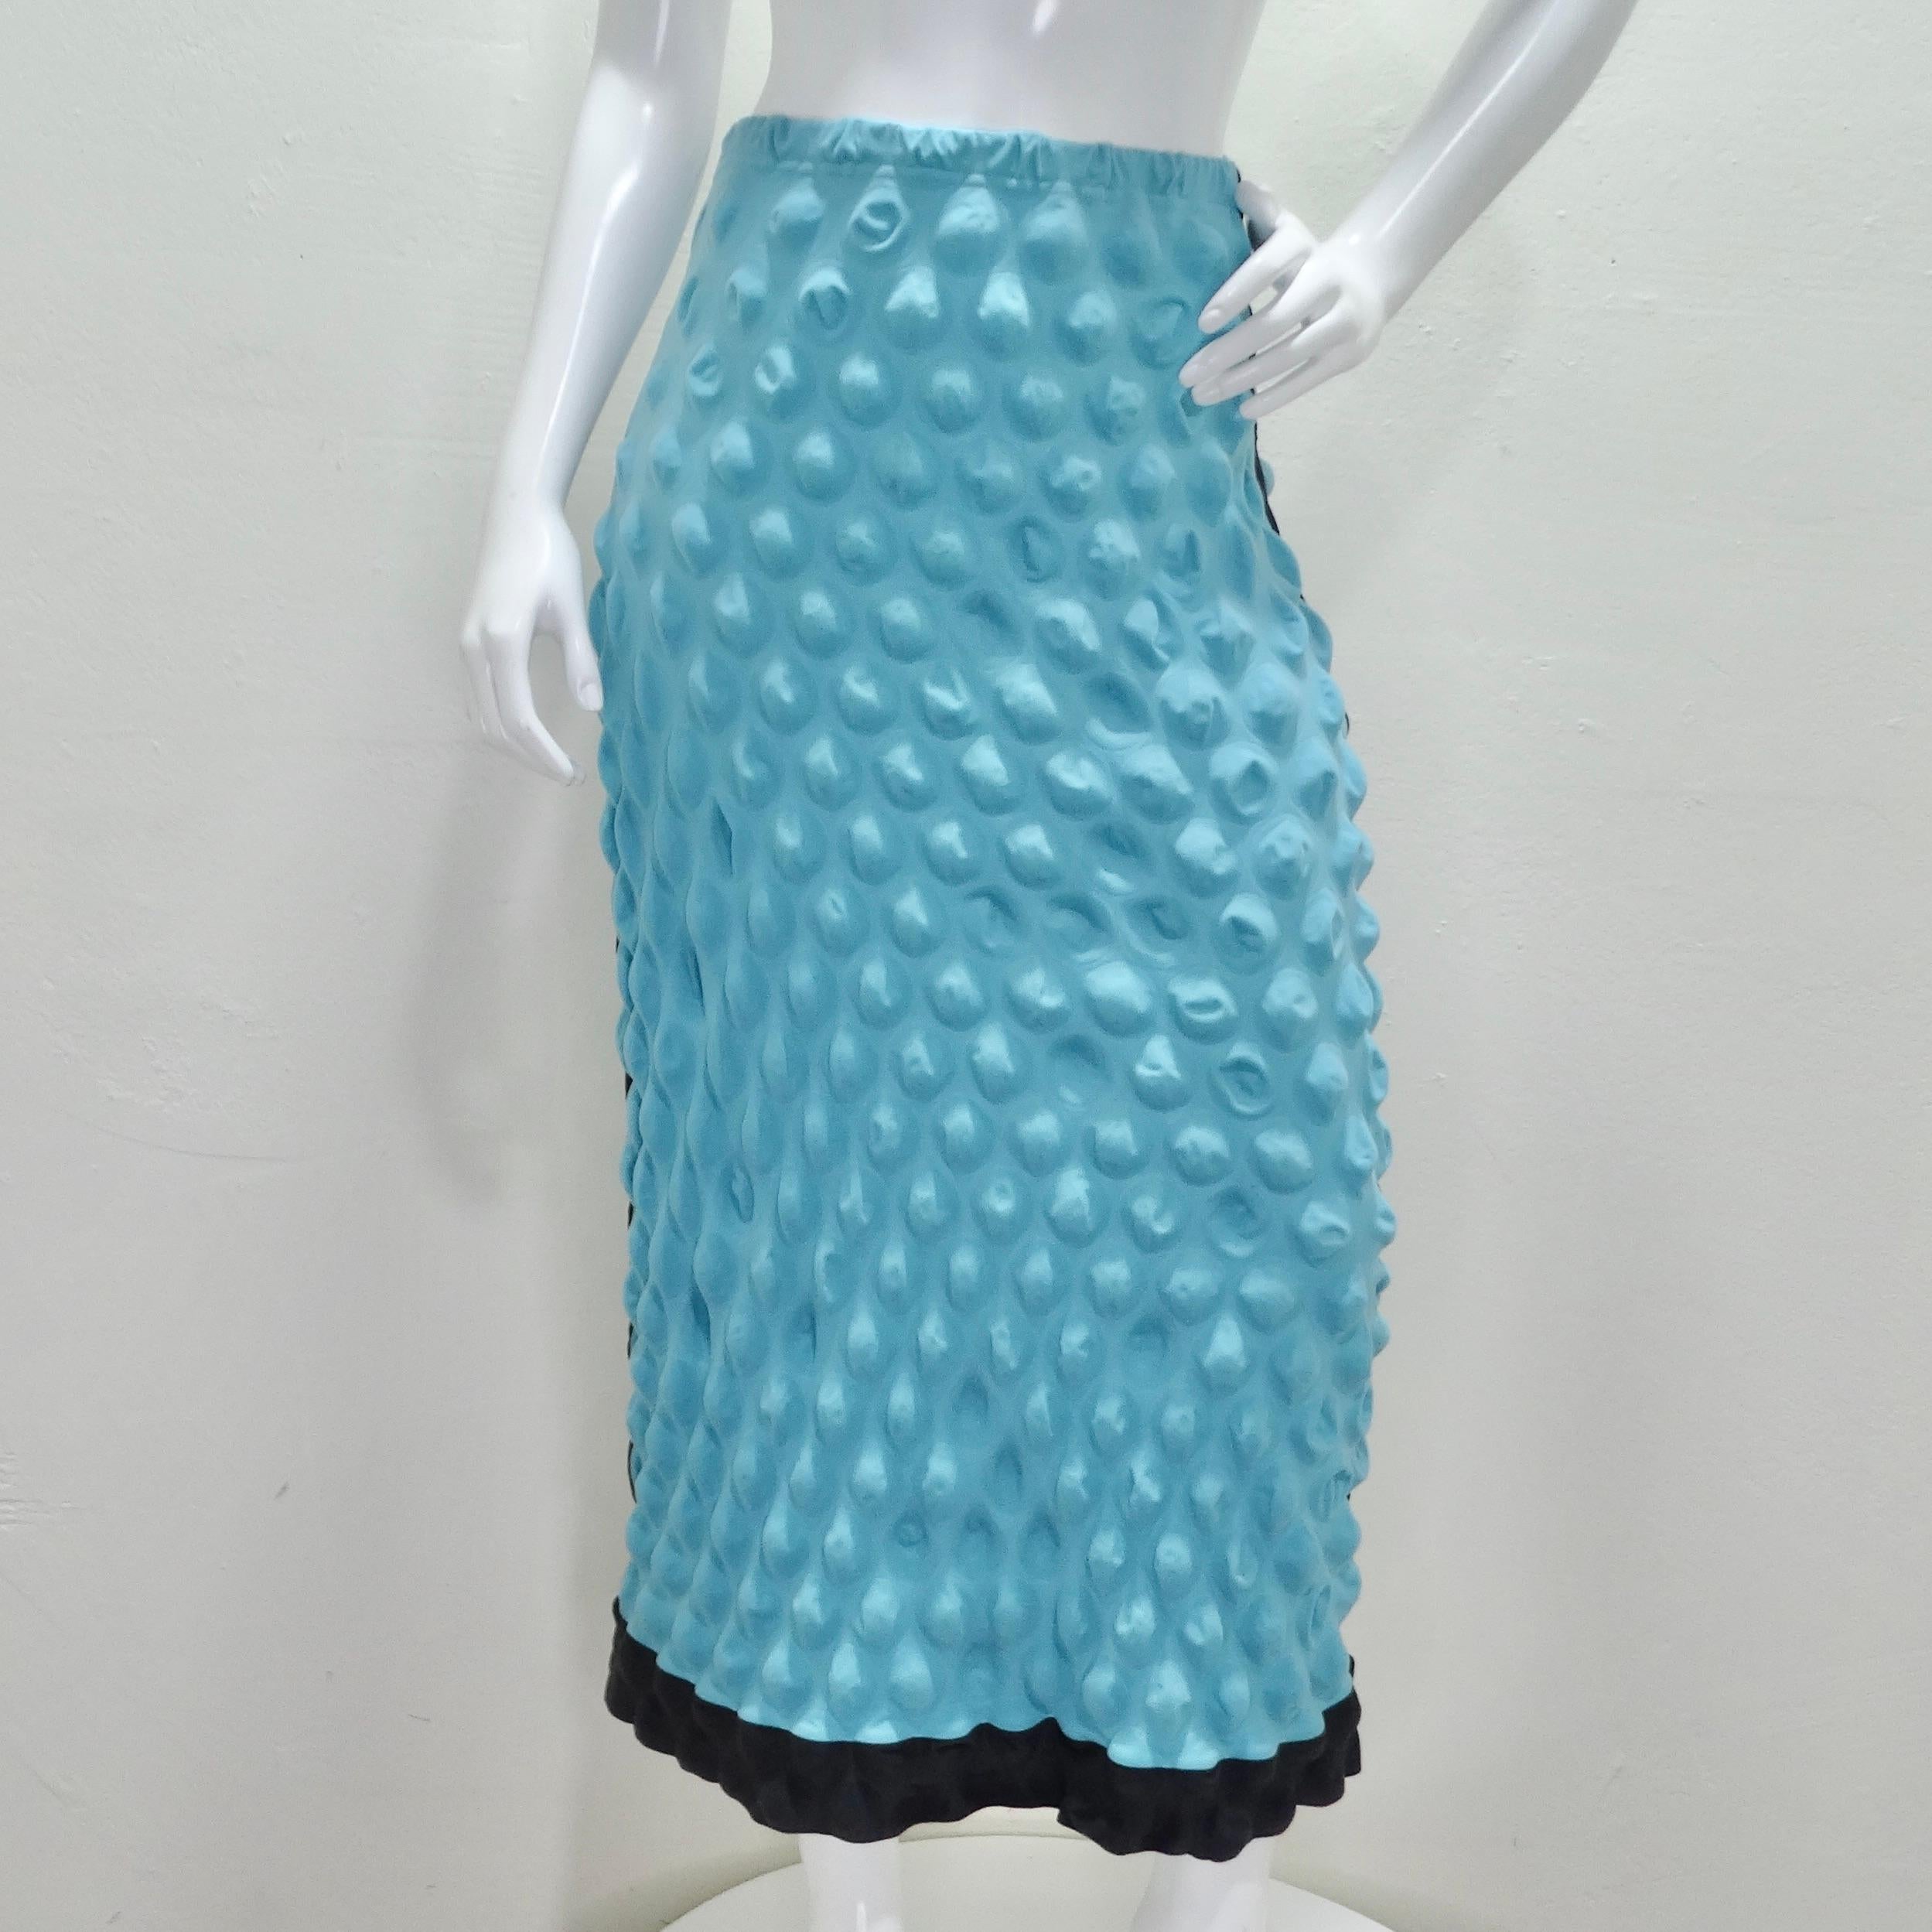 The Issey Miyake 1990s Blue Bubble Skirt is a vintage piece that showcases the brand's innovative approach to textiles and design. This mid-length pencil skirt features a distinctive bubble wrap motif, creating a unique texture that sets it apart